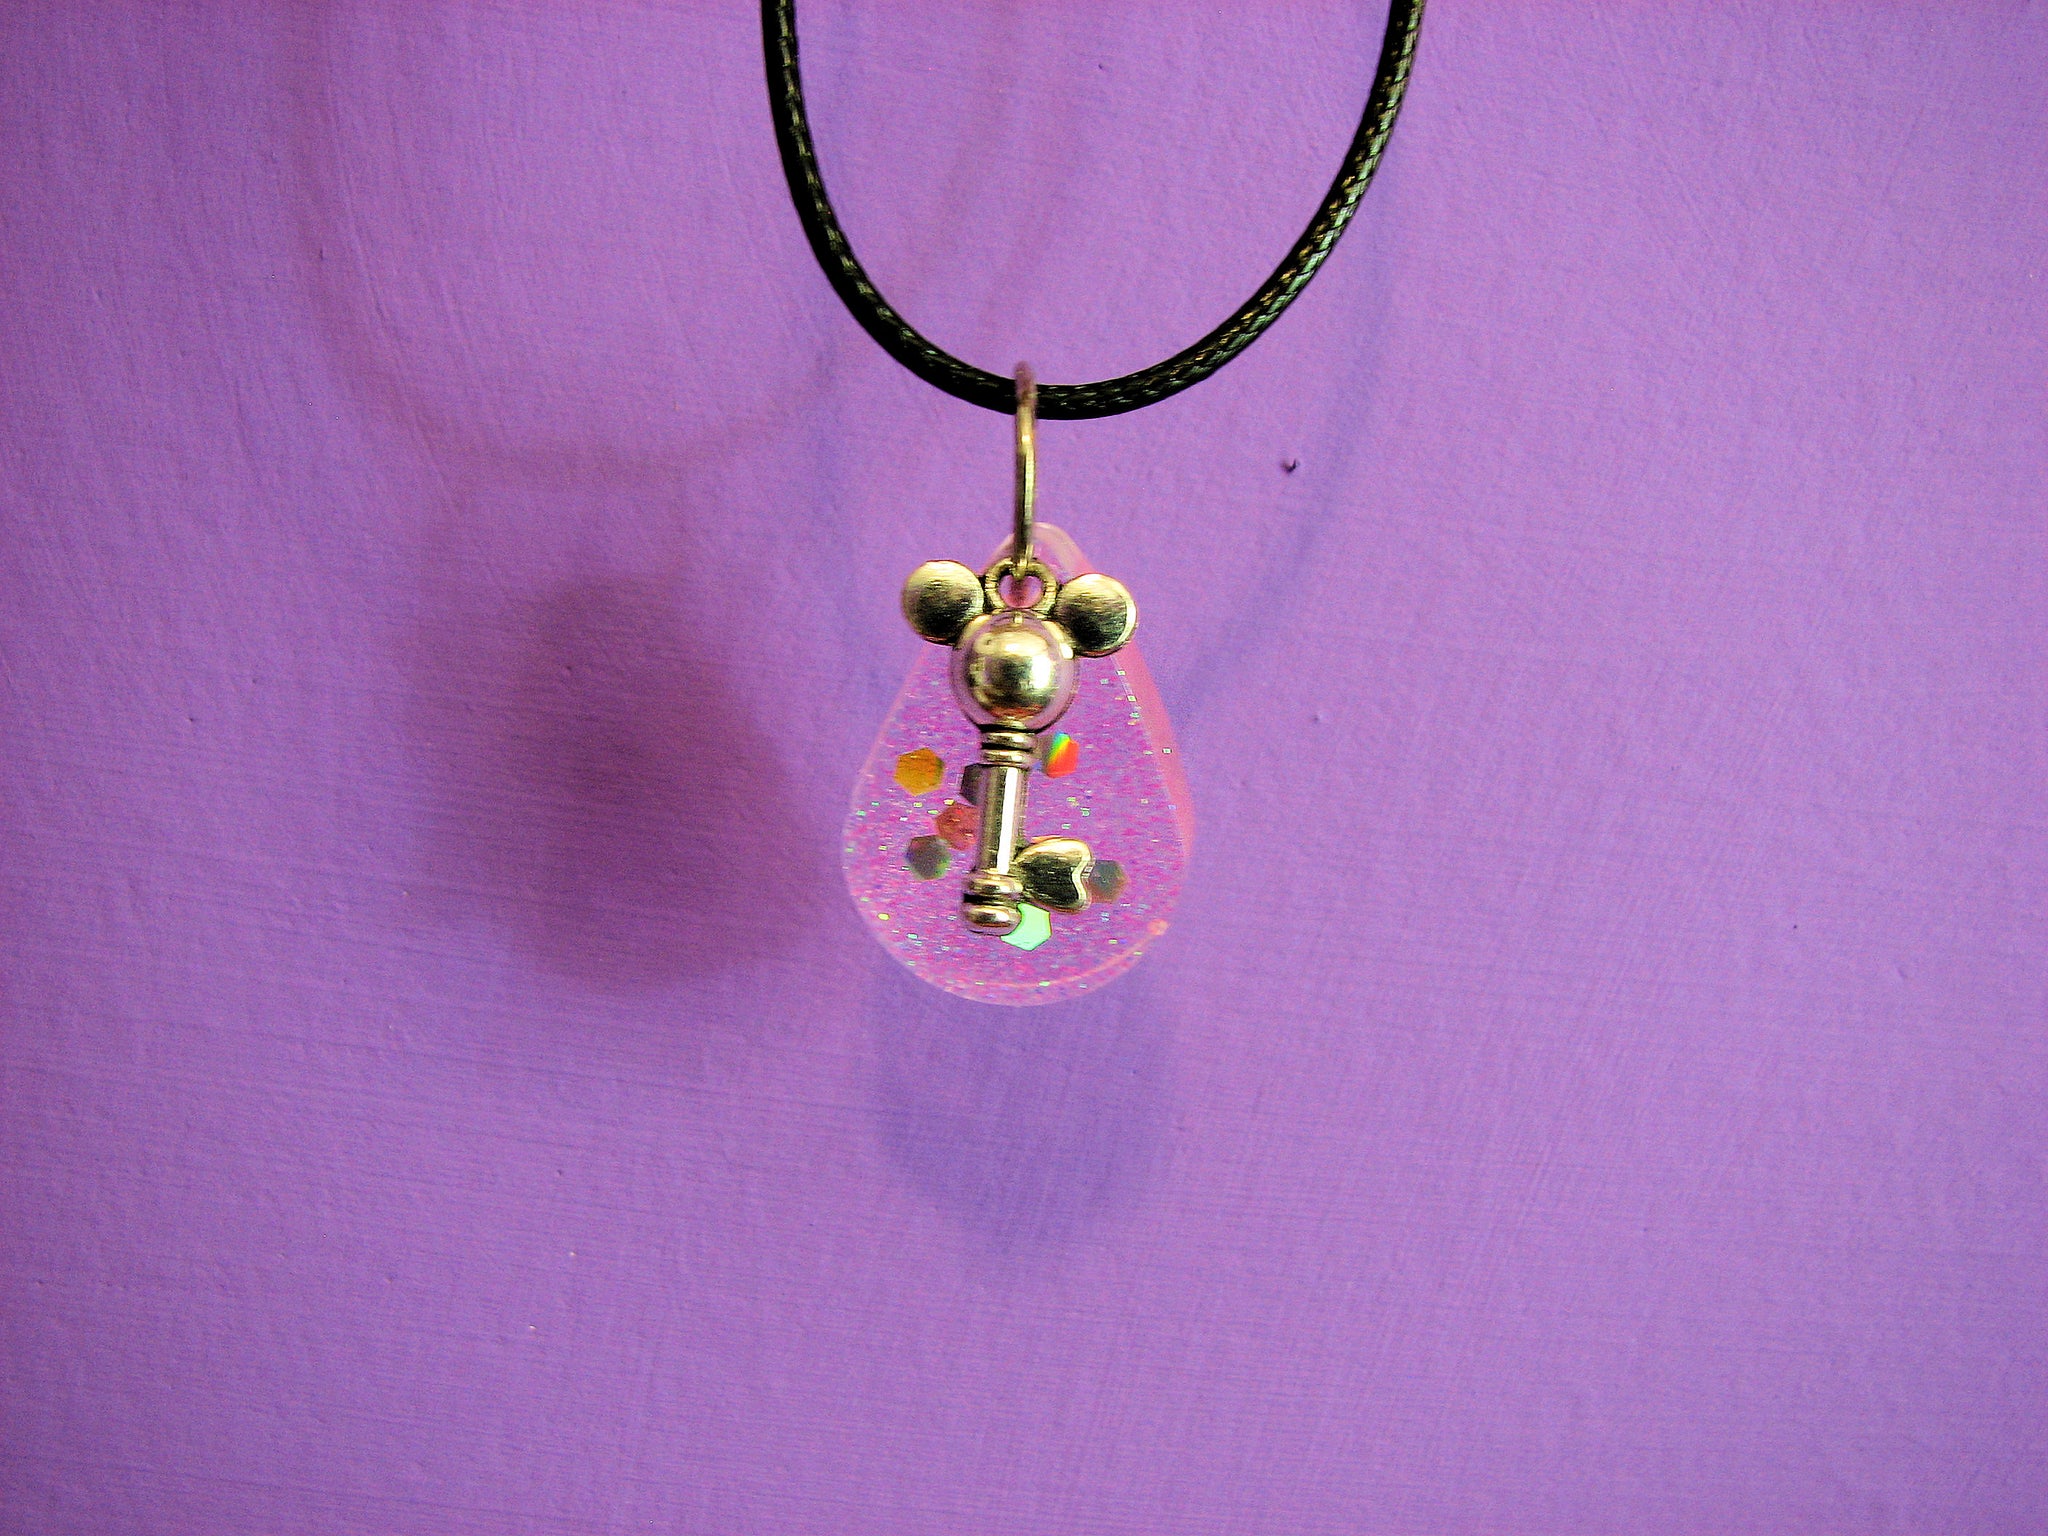 Mouse Ears Key Charm Necklace